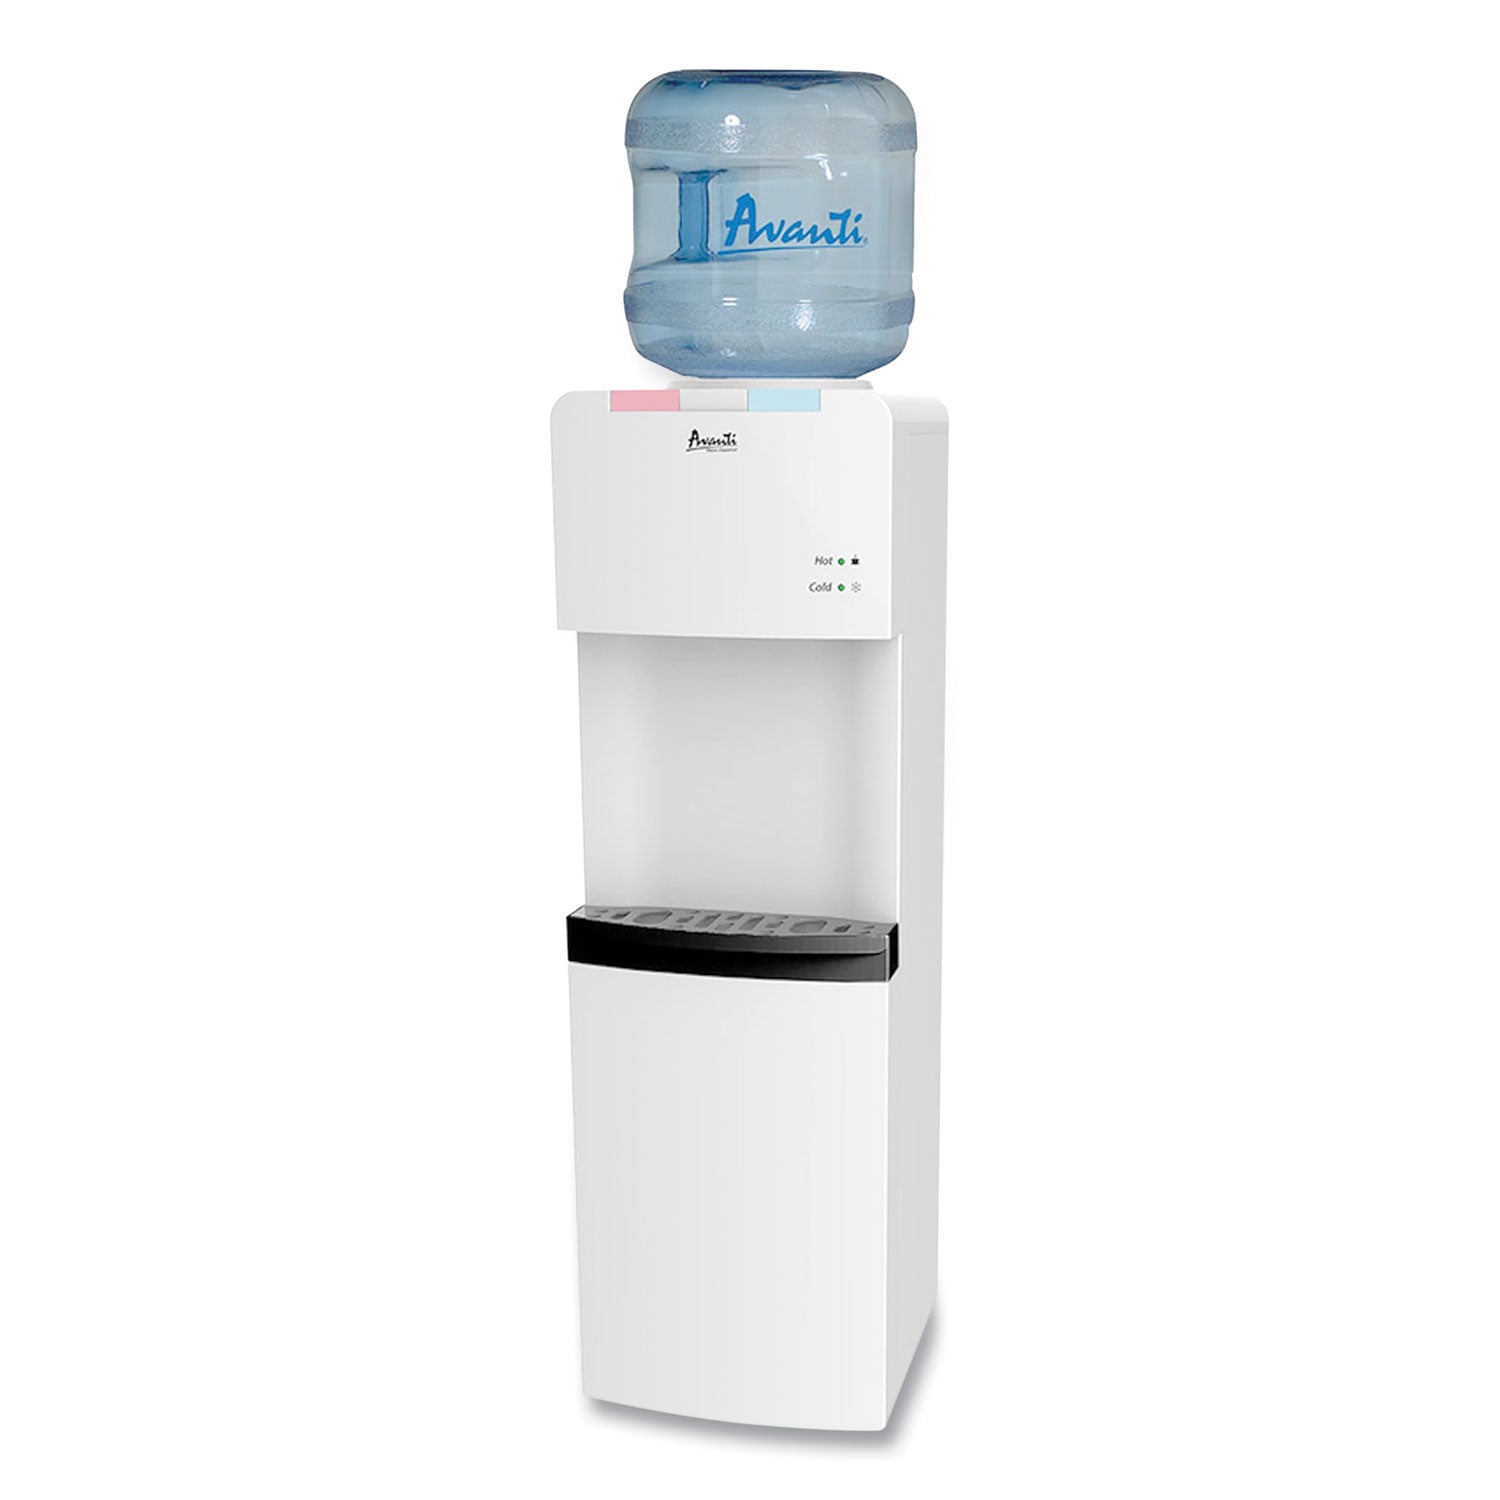 hot-and-cold-water-stand-up-dispenser-3-5-gal-11-x-12-x-36-white_avawdhc770i0w - 1